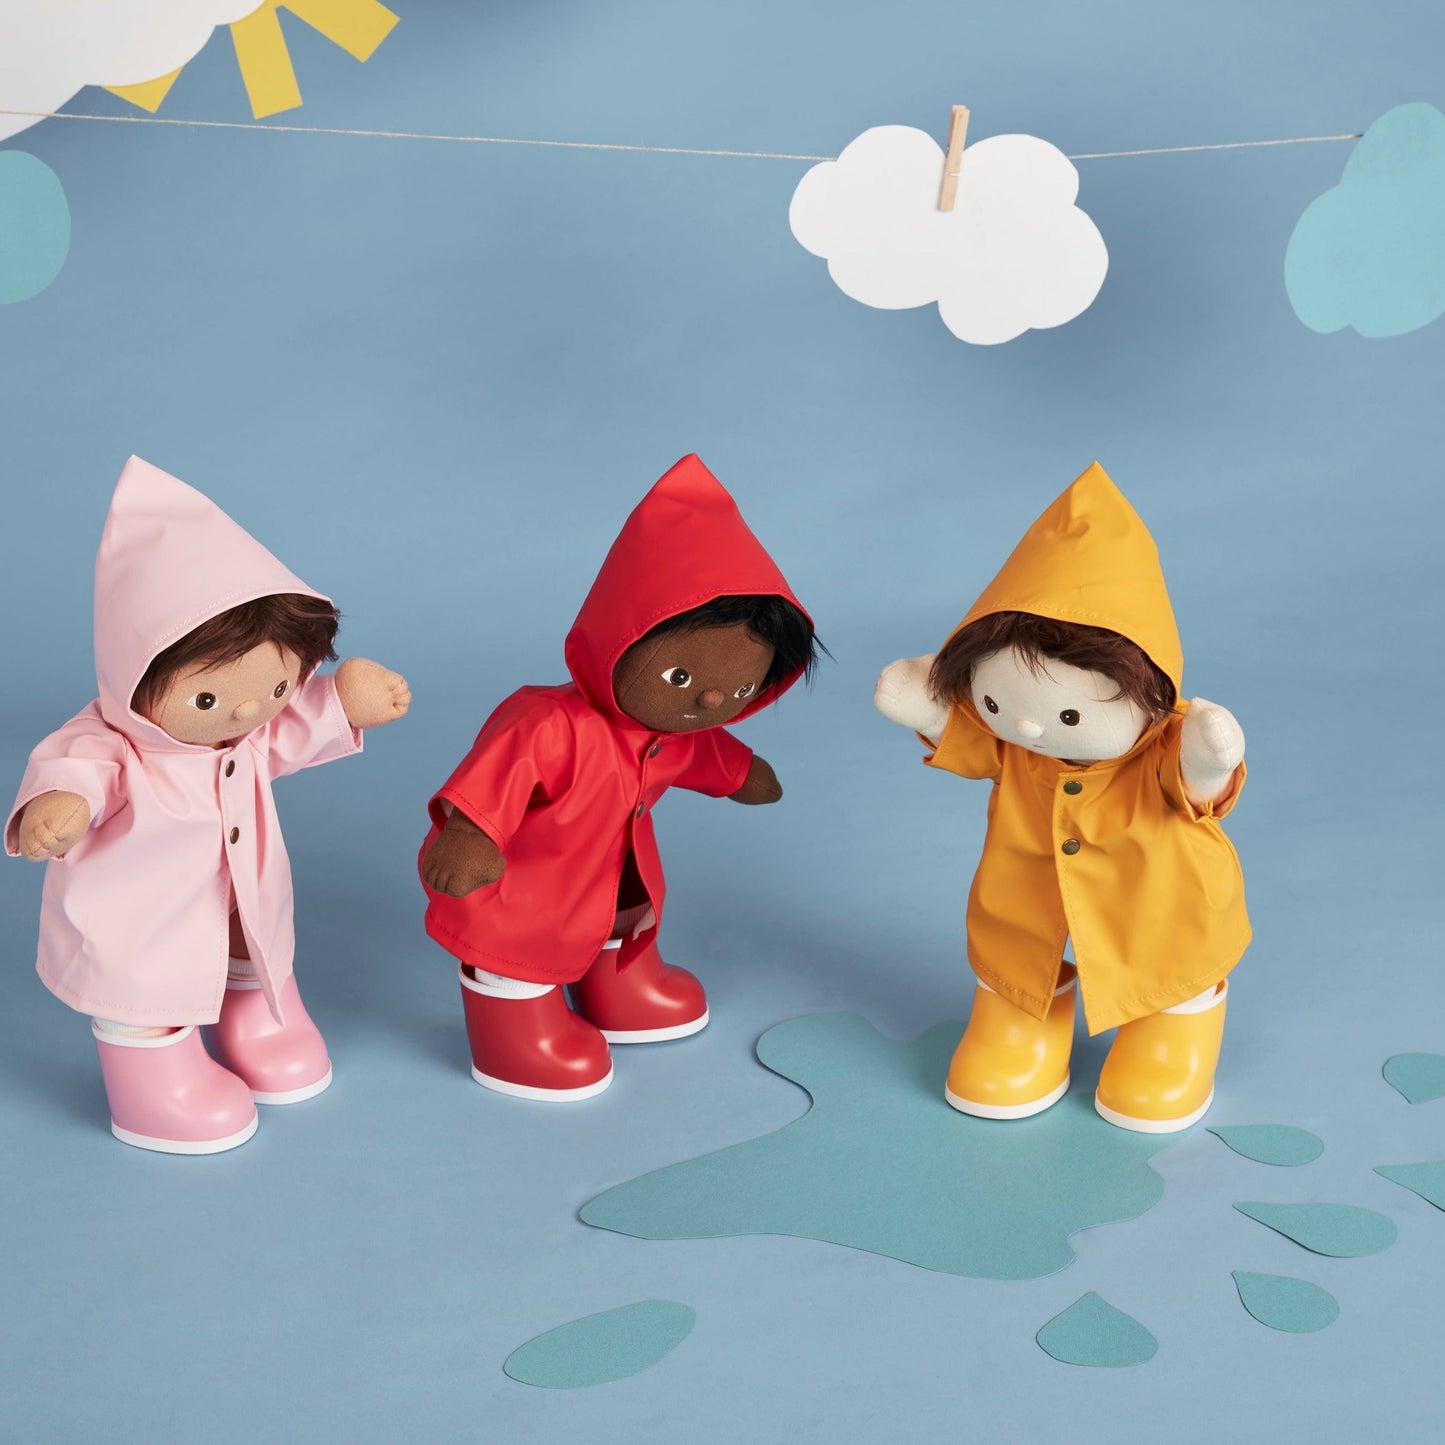 Dinkum Doll Rainy Play Set - Yellow - Little Reef and Friends